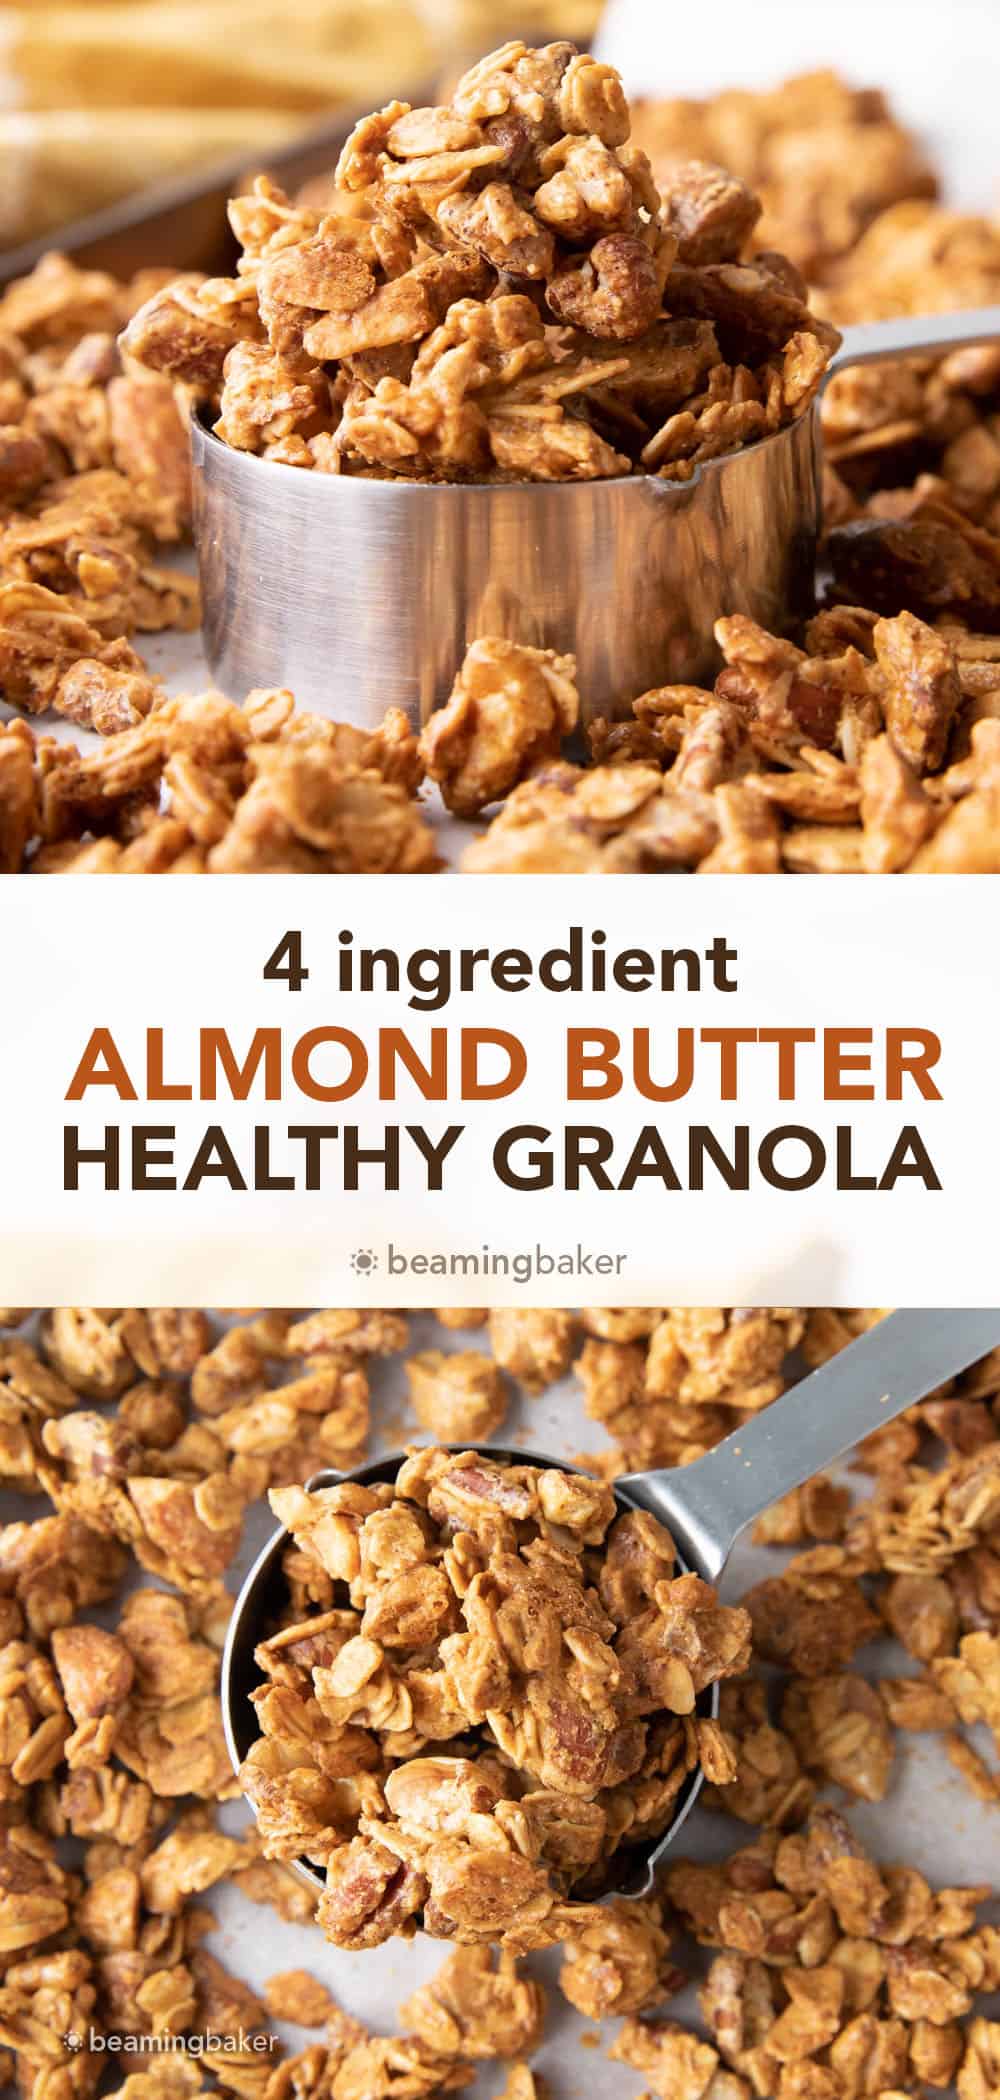 4 Ingredient Almond Butter Granola: this super easy almond butter granola recipe calls for just 4 ingredients and a few mins of prep! Healthy almond butter granola was never so easy! #AlmondButter #Granola #Healthy #Recipe | Recipe at BeamingBaker.com